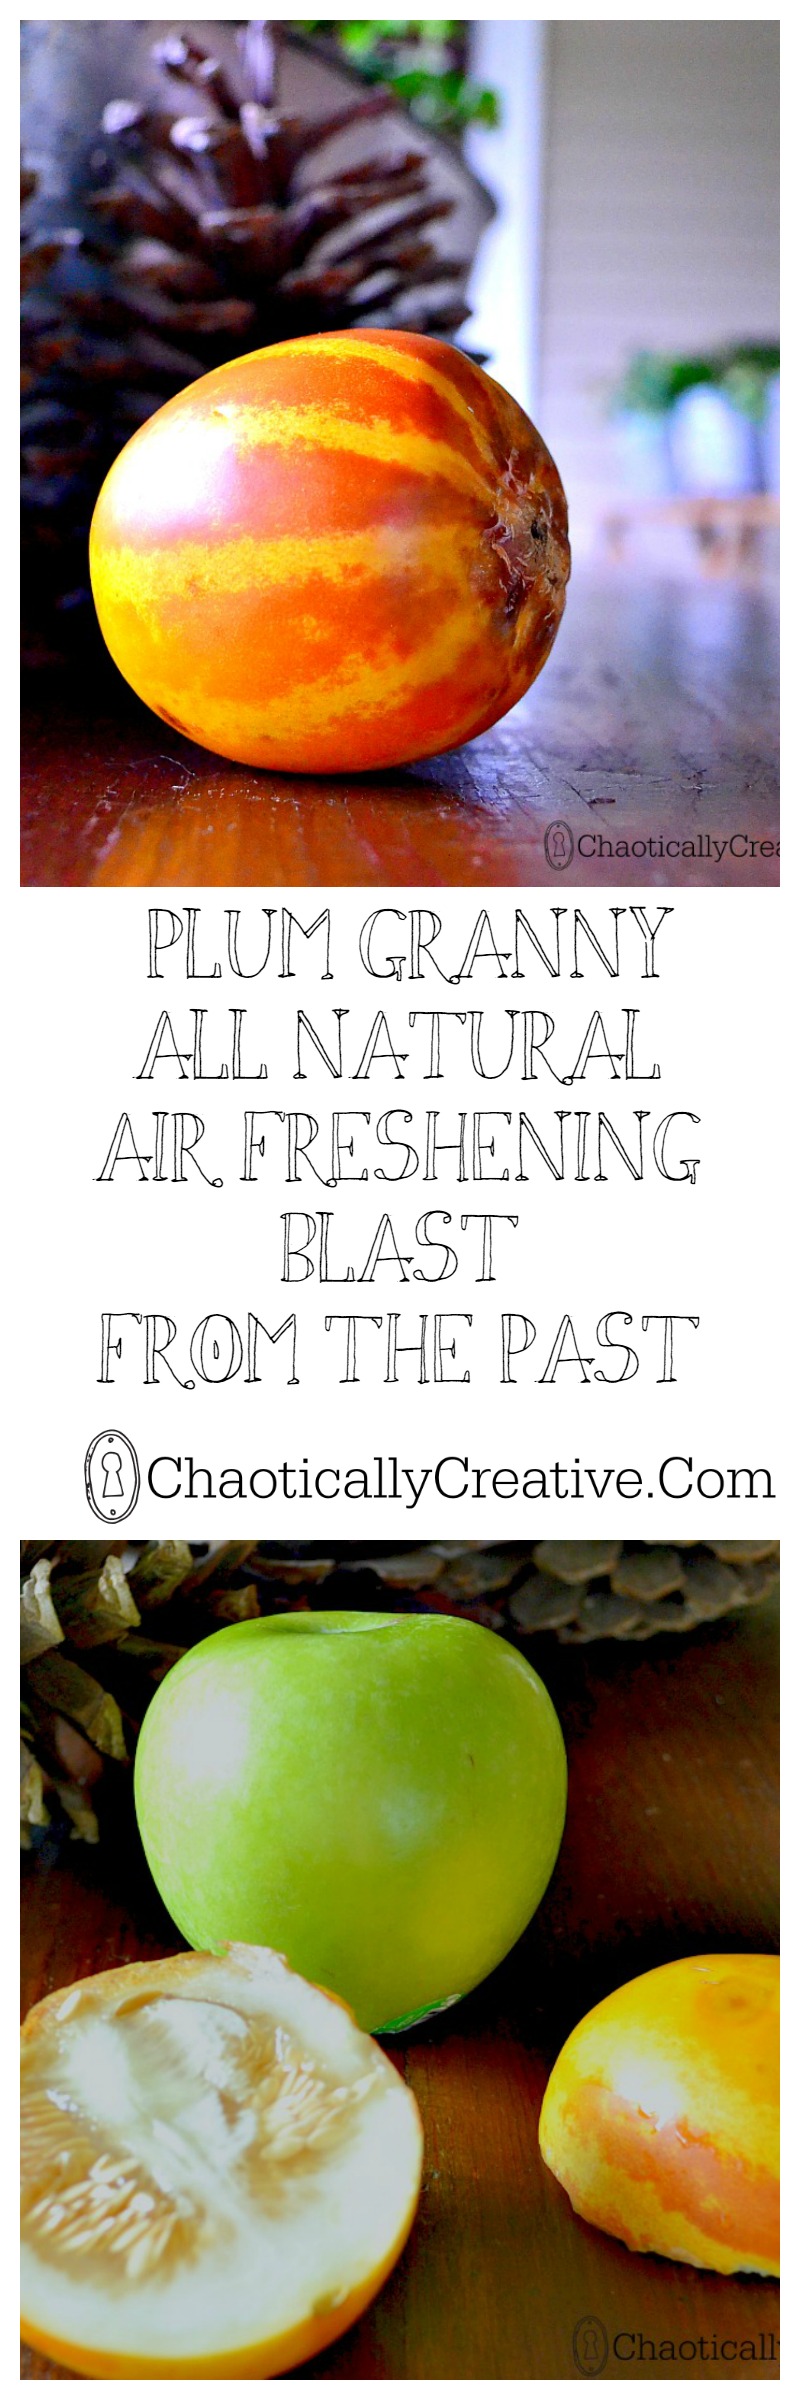 Details about   25 Heirloom Plum Granny Seeds 